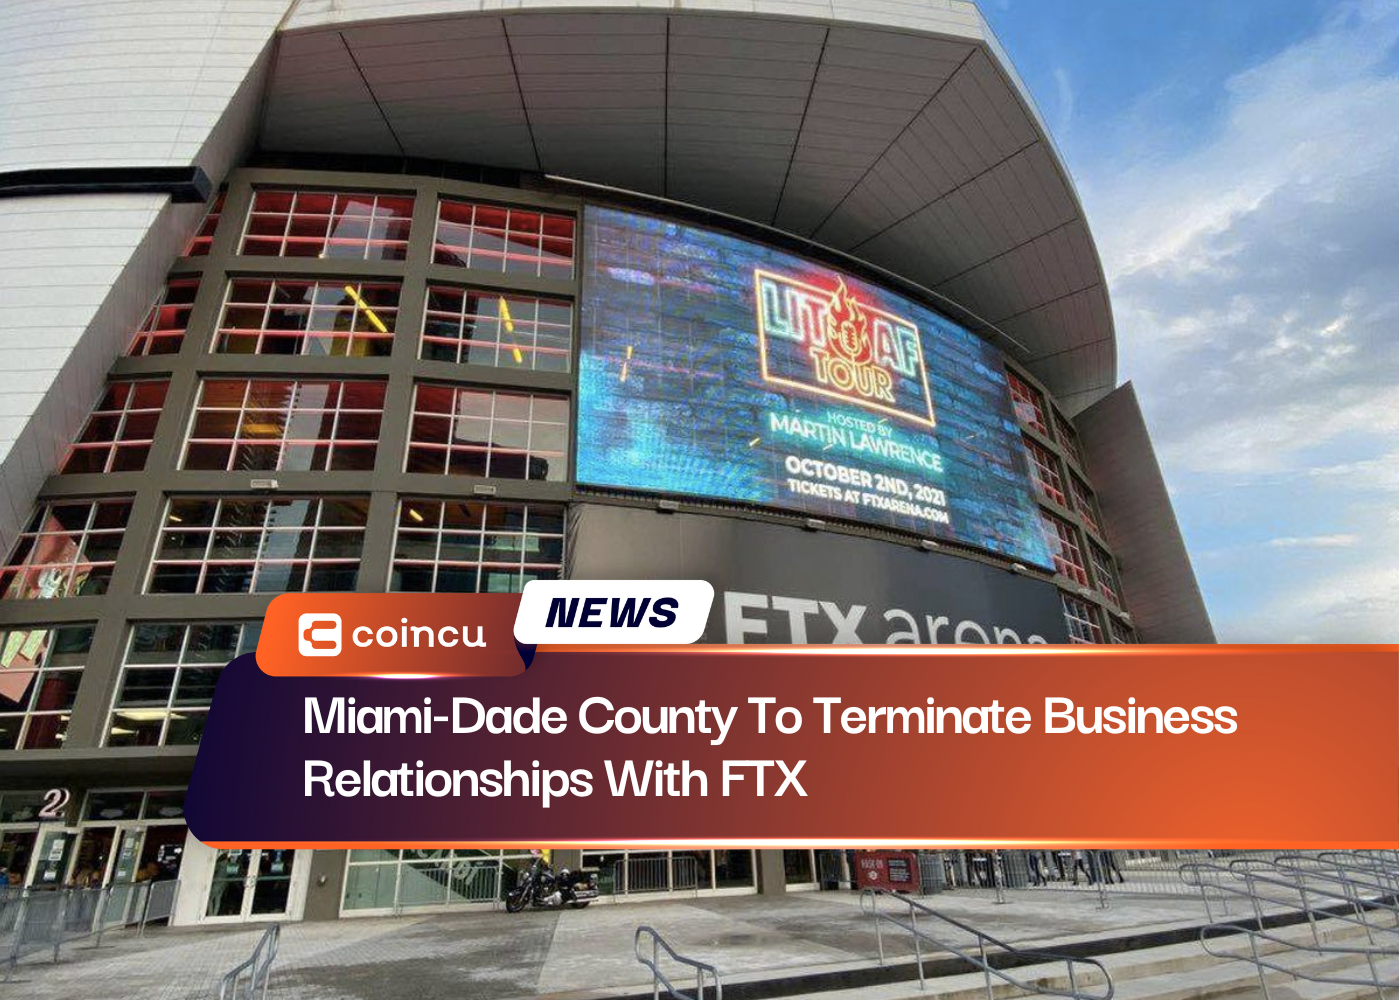 Miami-Dade County To Terminate Business Relationships With FTX